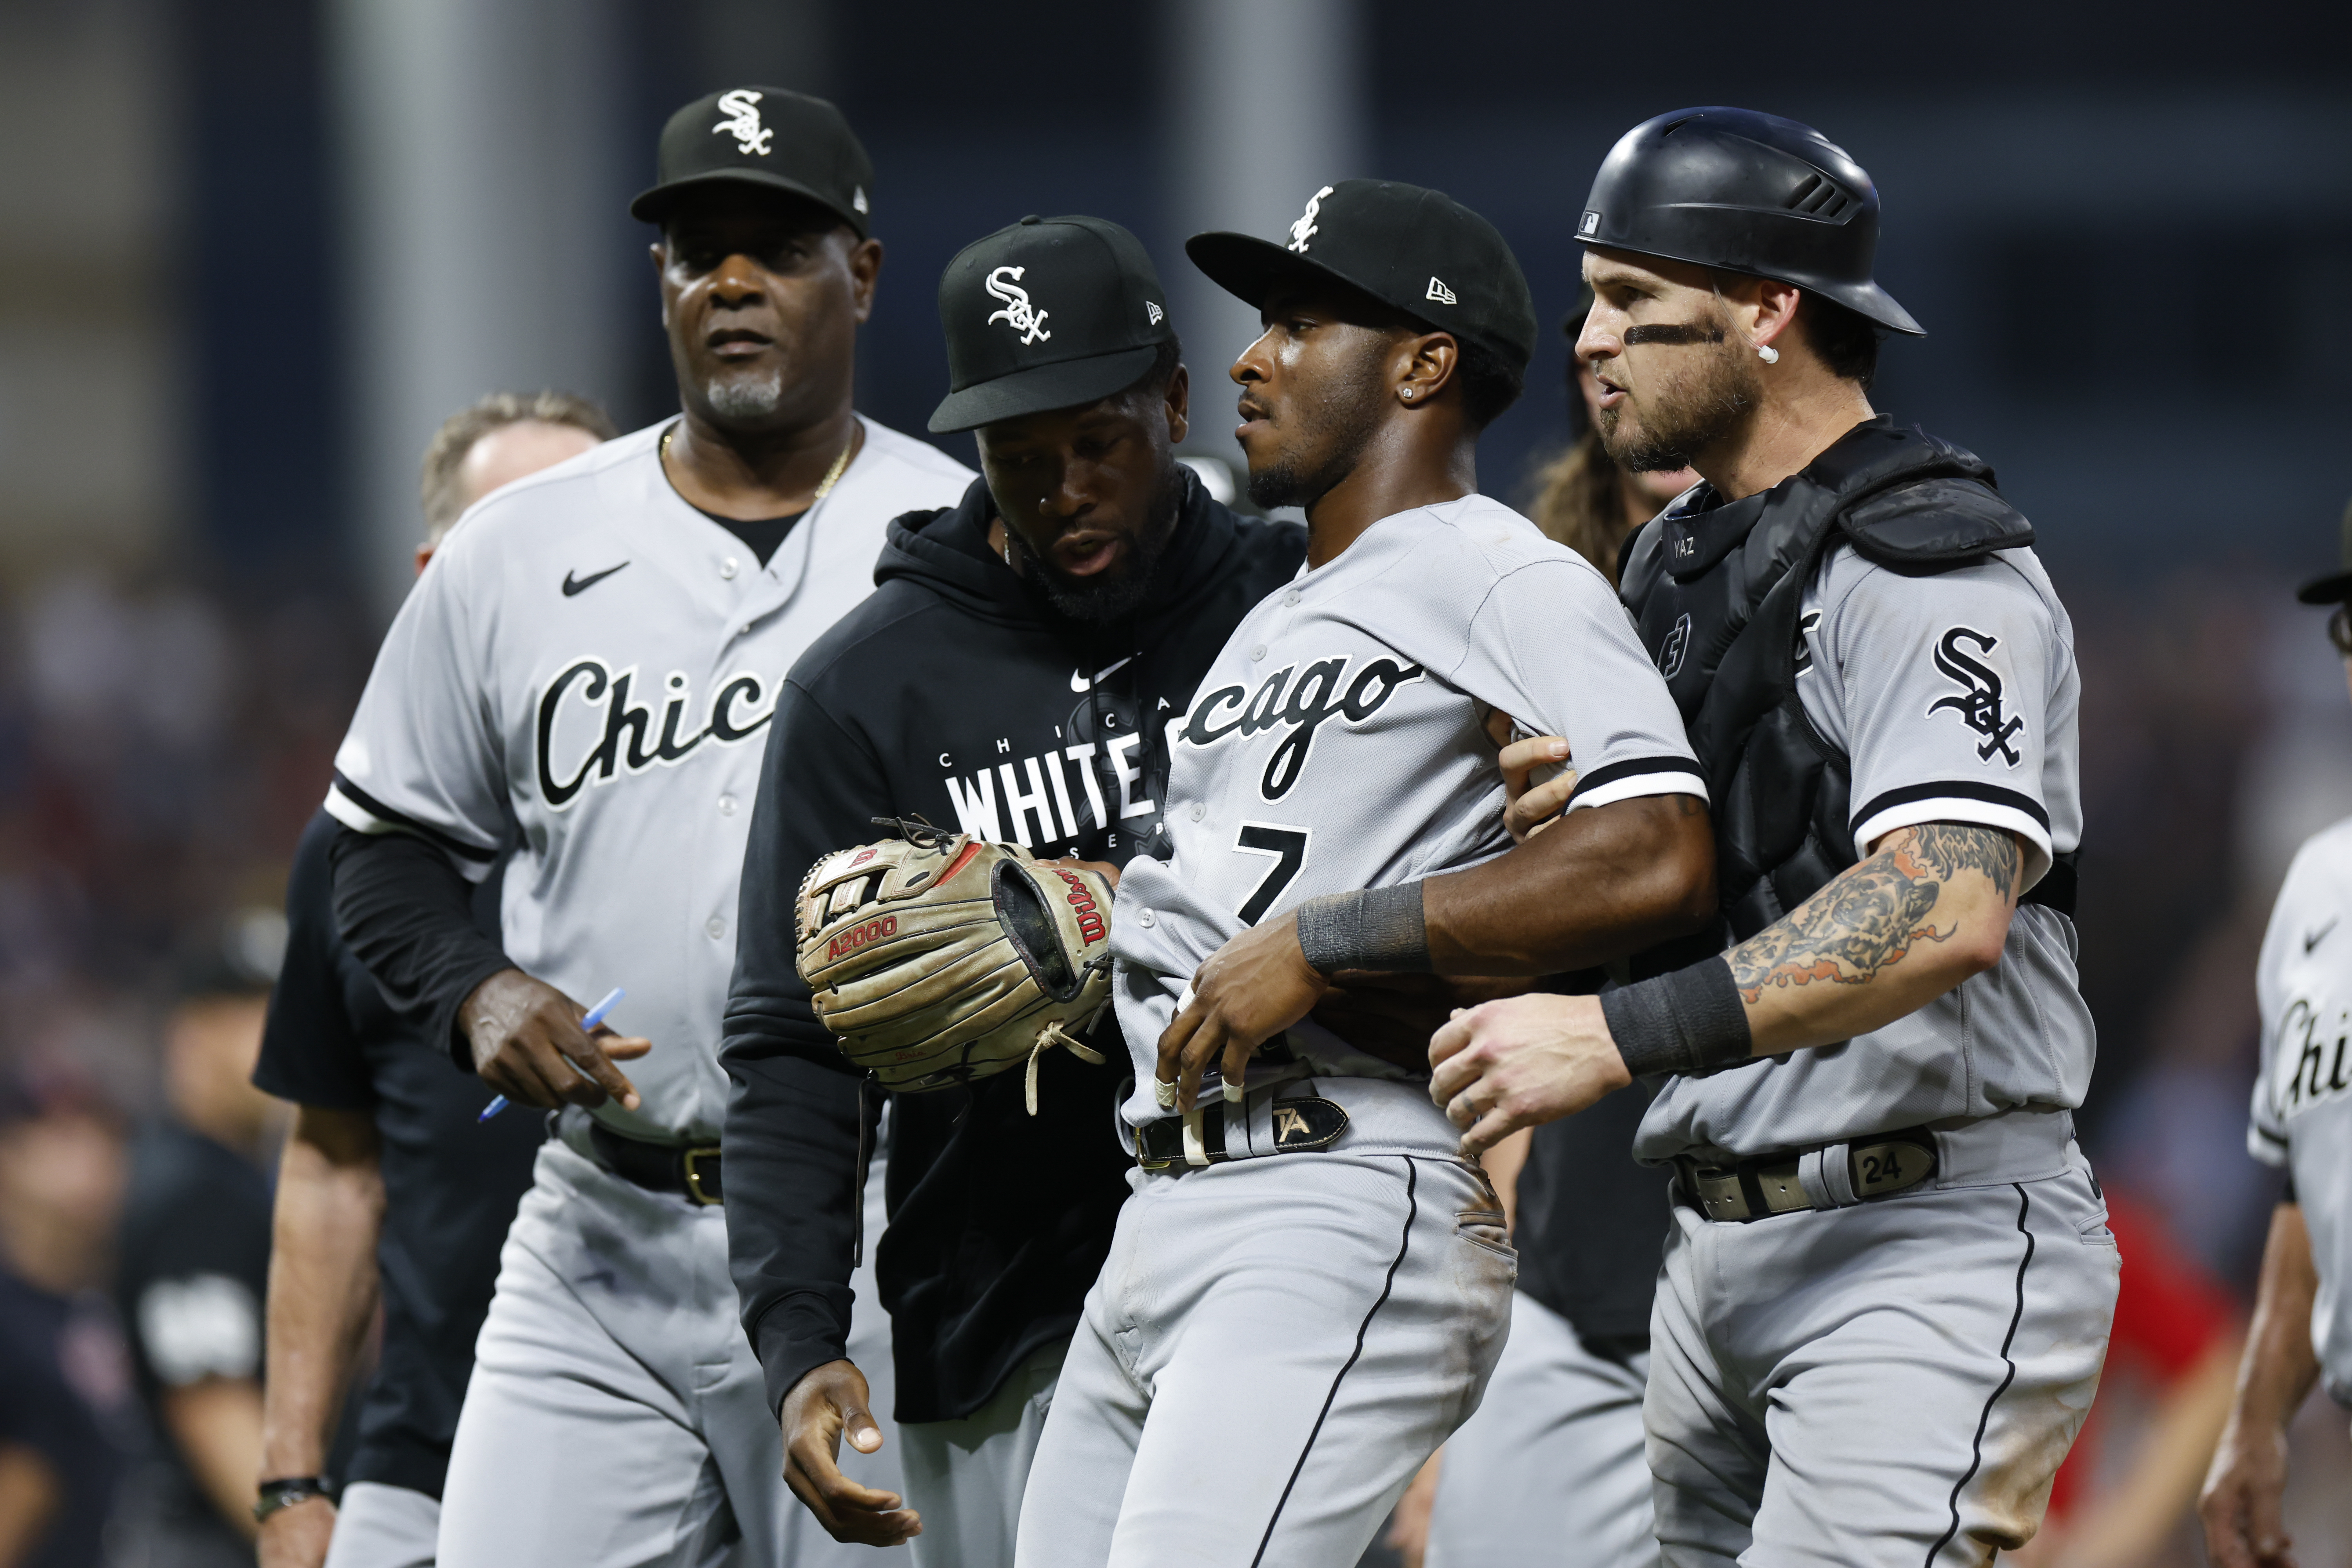 The Dysfunctional Mess That Is the Chicago White Sox